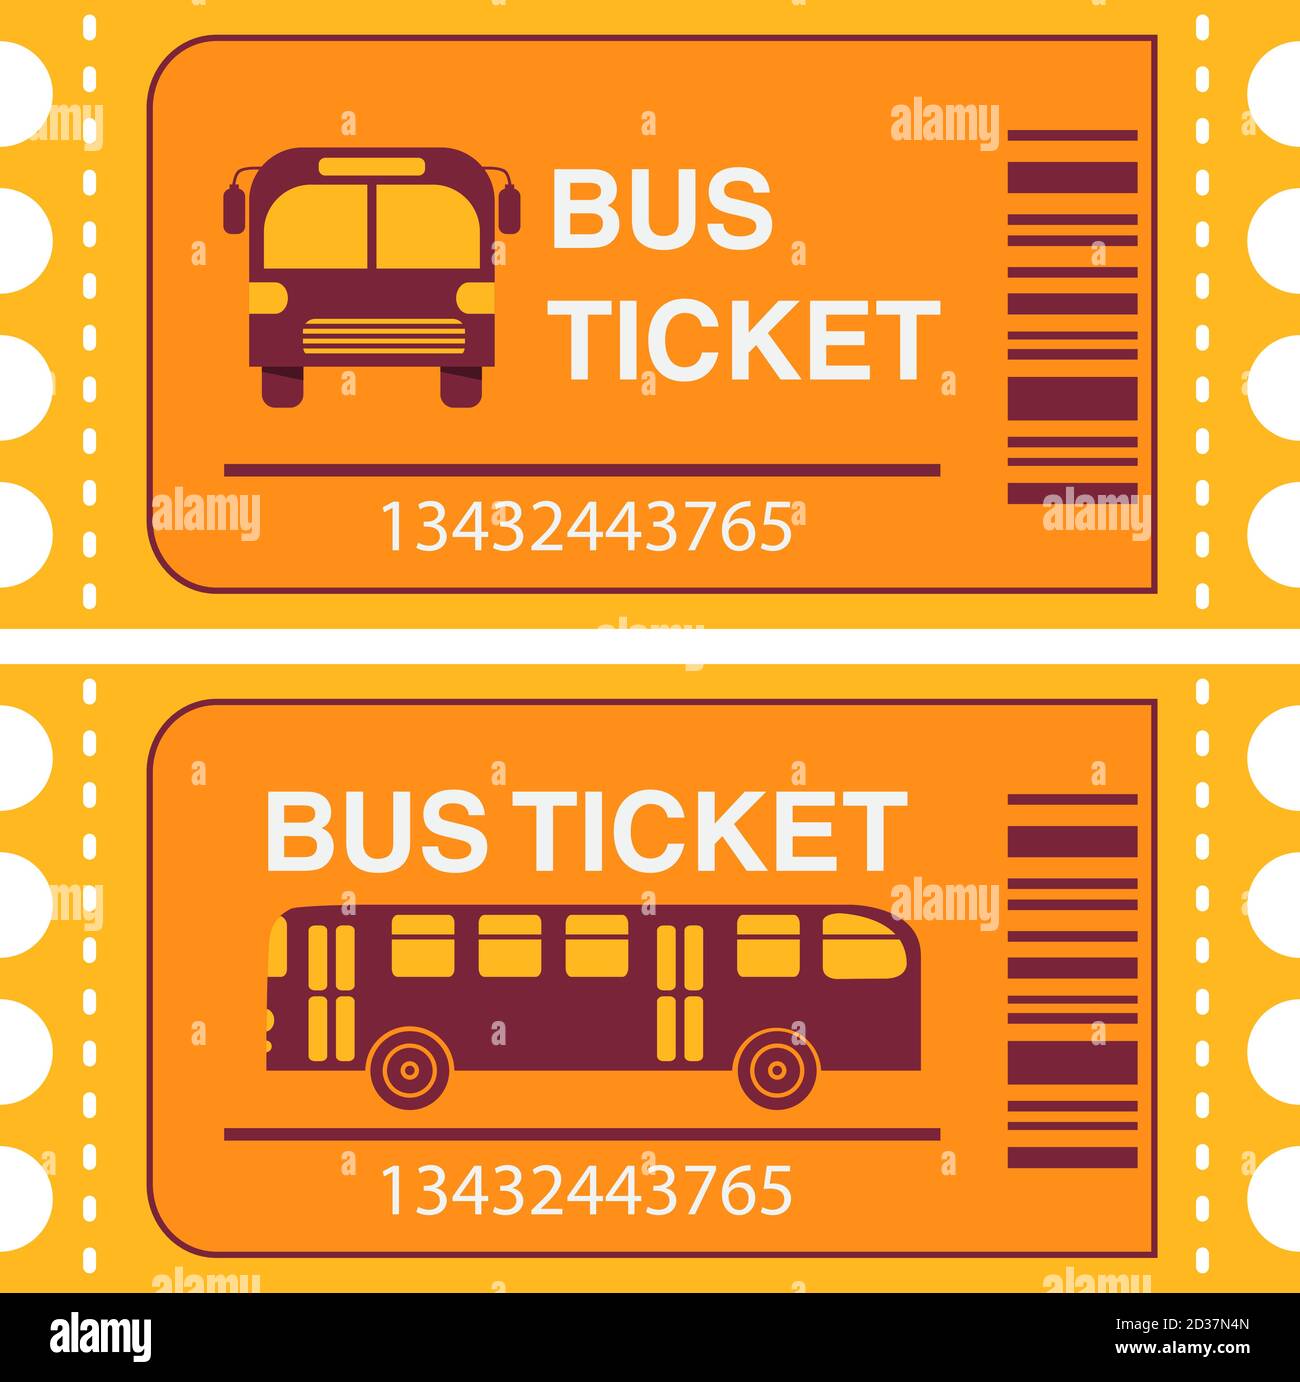 17-best-bus-ticket-images-on-pinterest-bus-tickets-graphics-and-london-transport